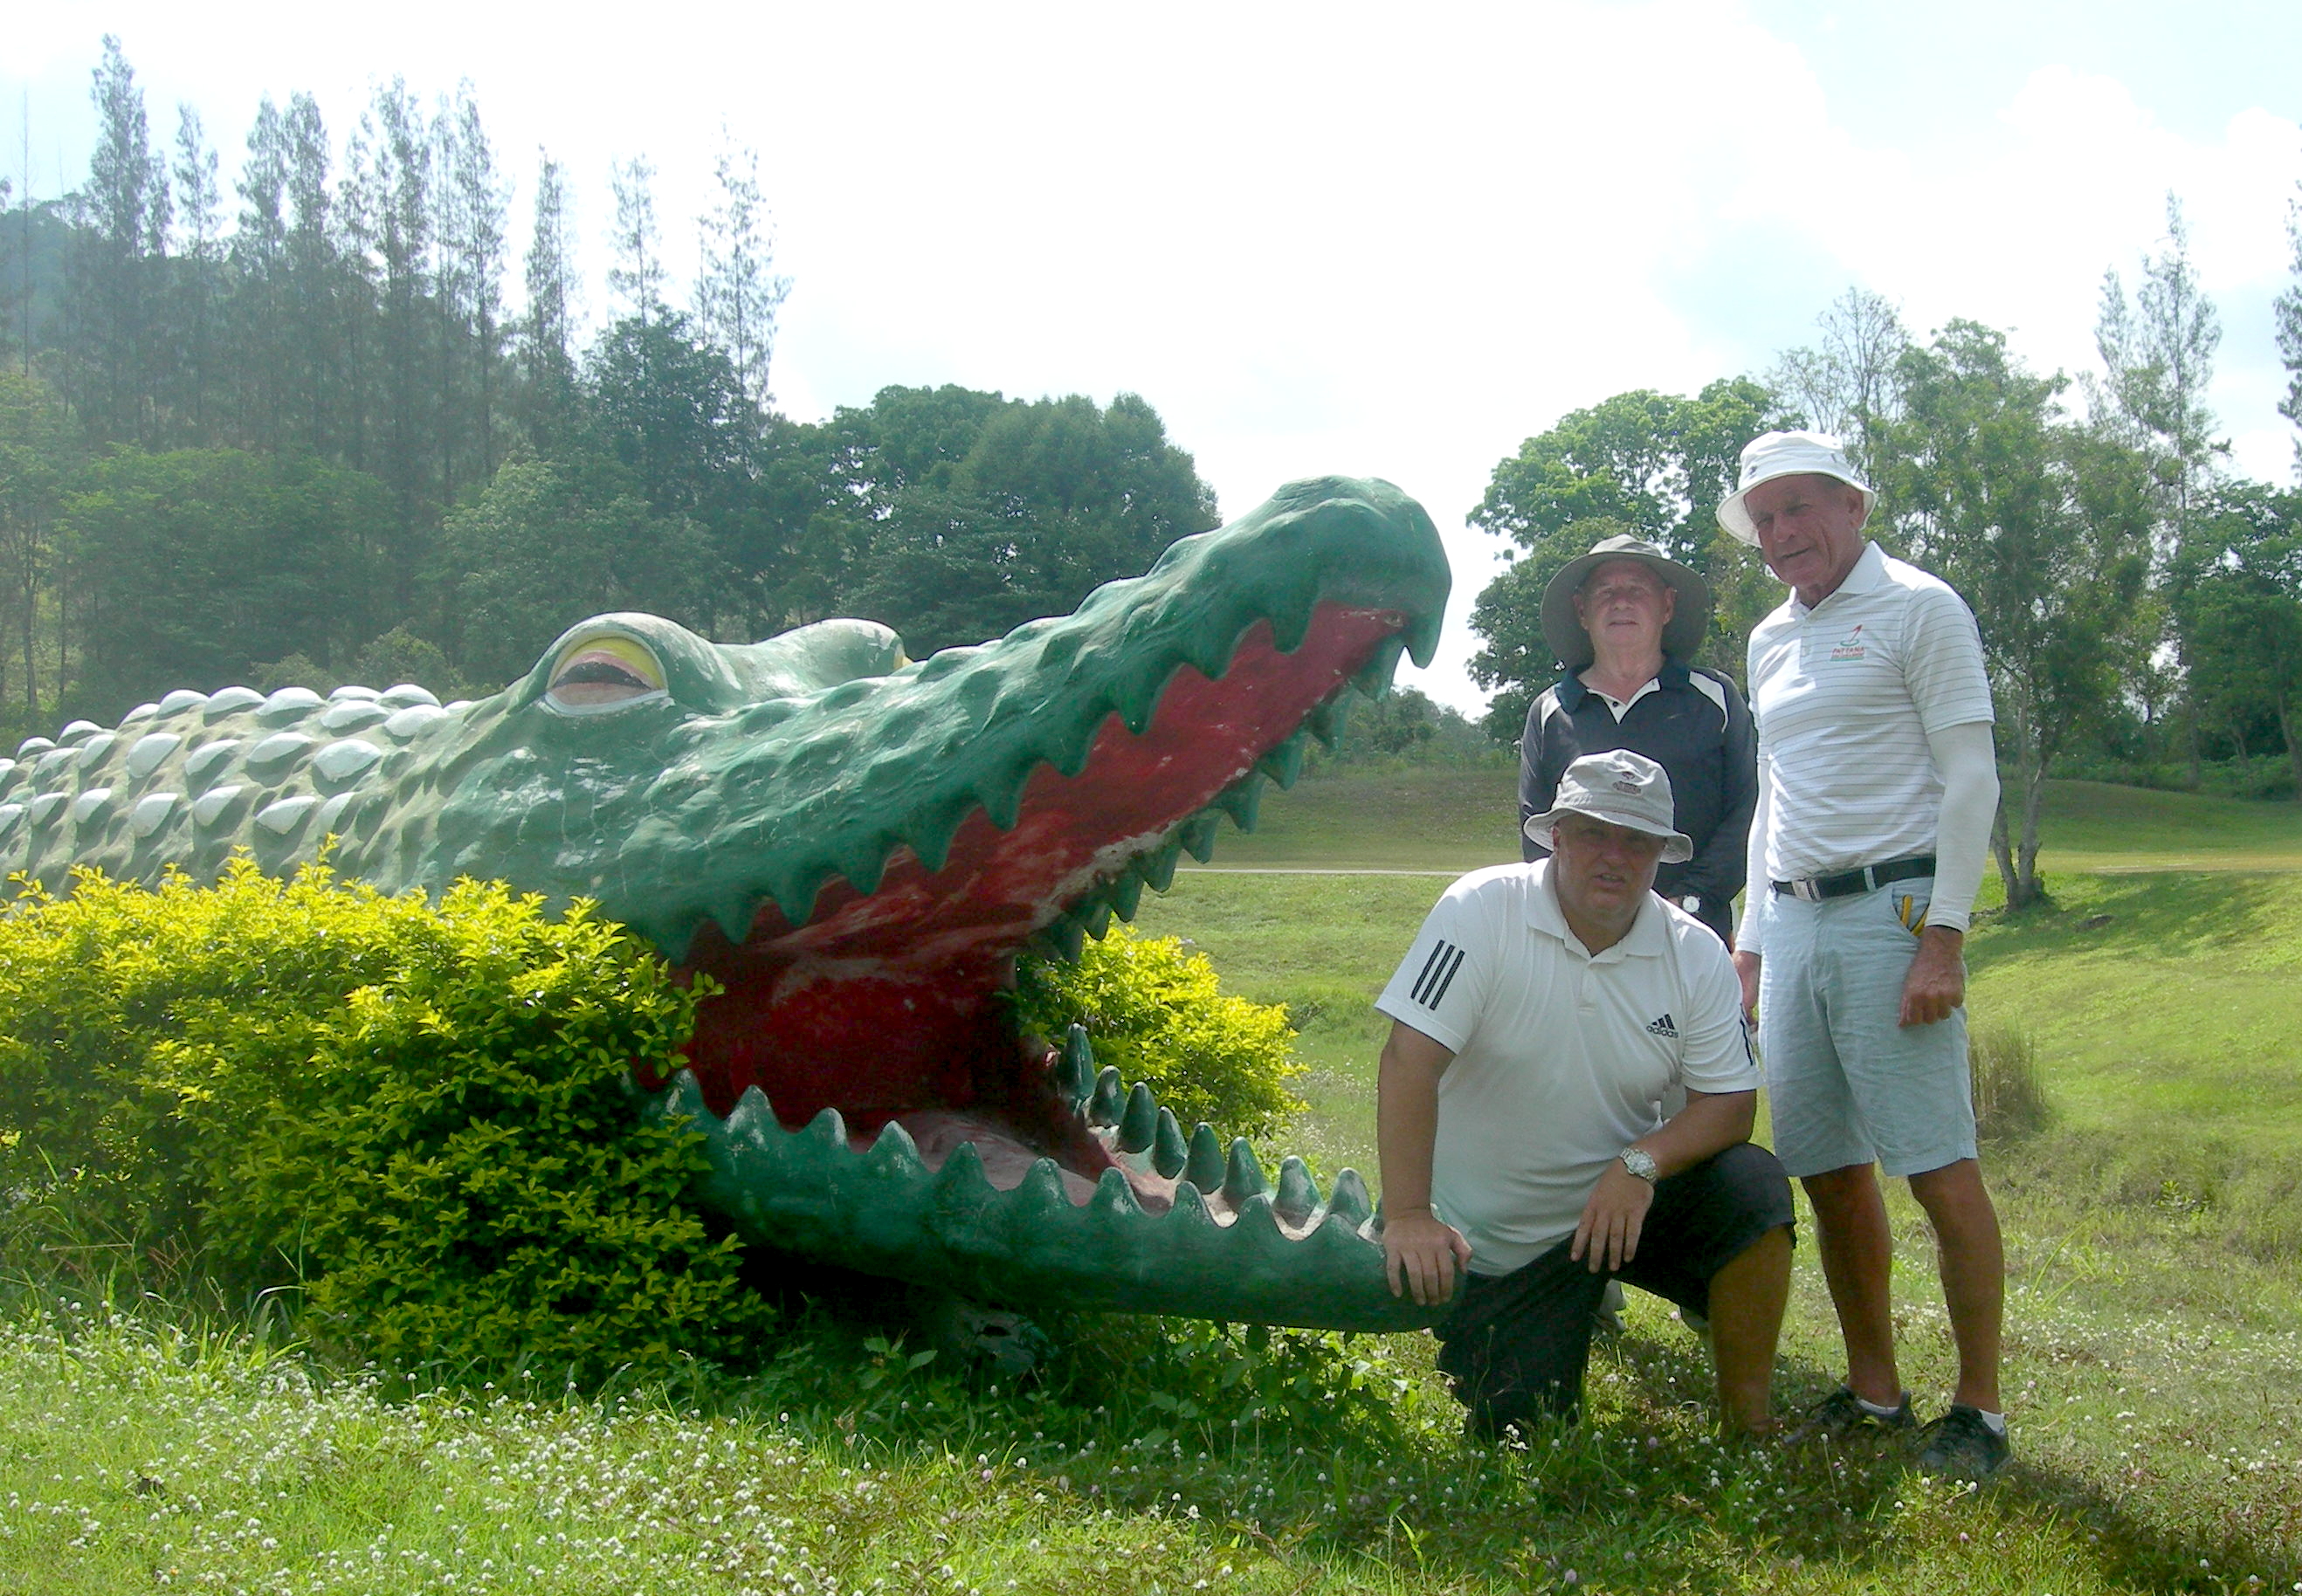 Dave Smith, Willie Hogg and Paddy Devereux feed the Treasure Hill croc.